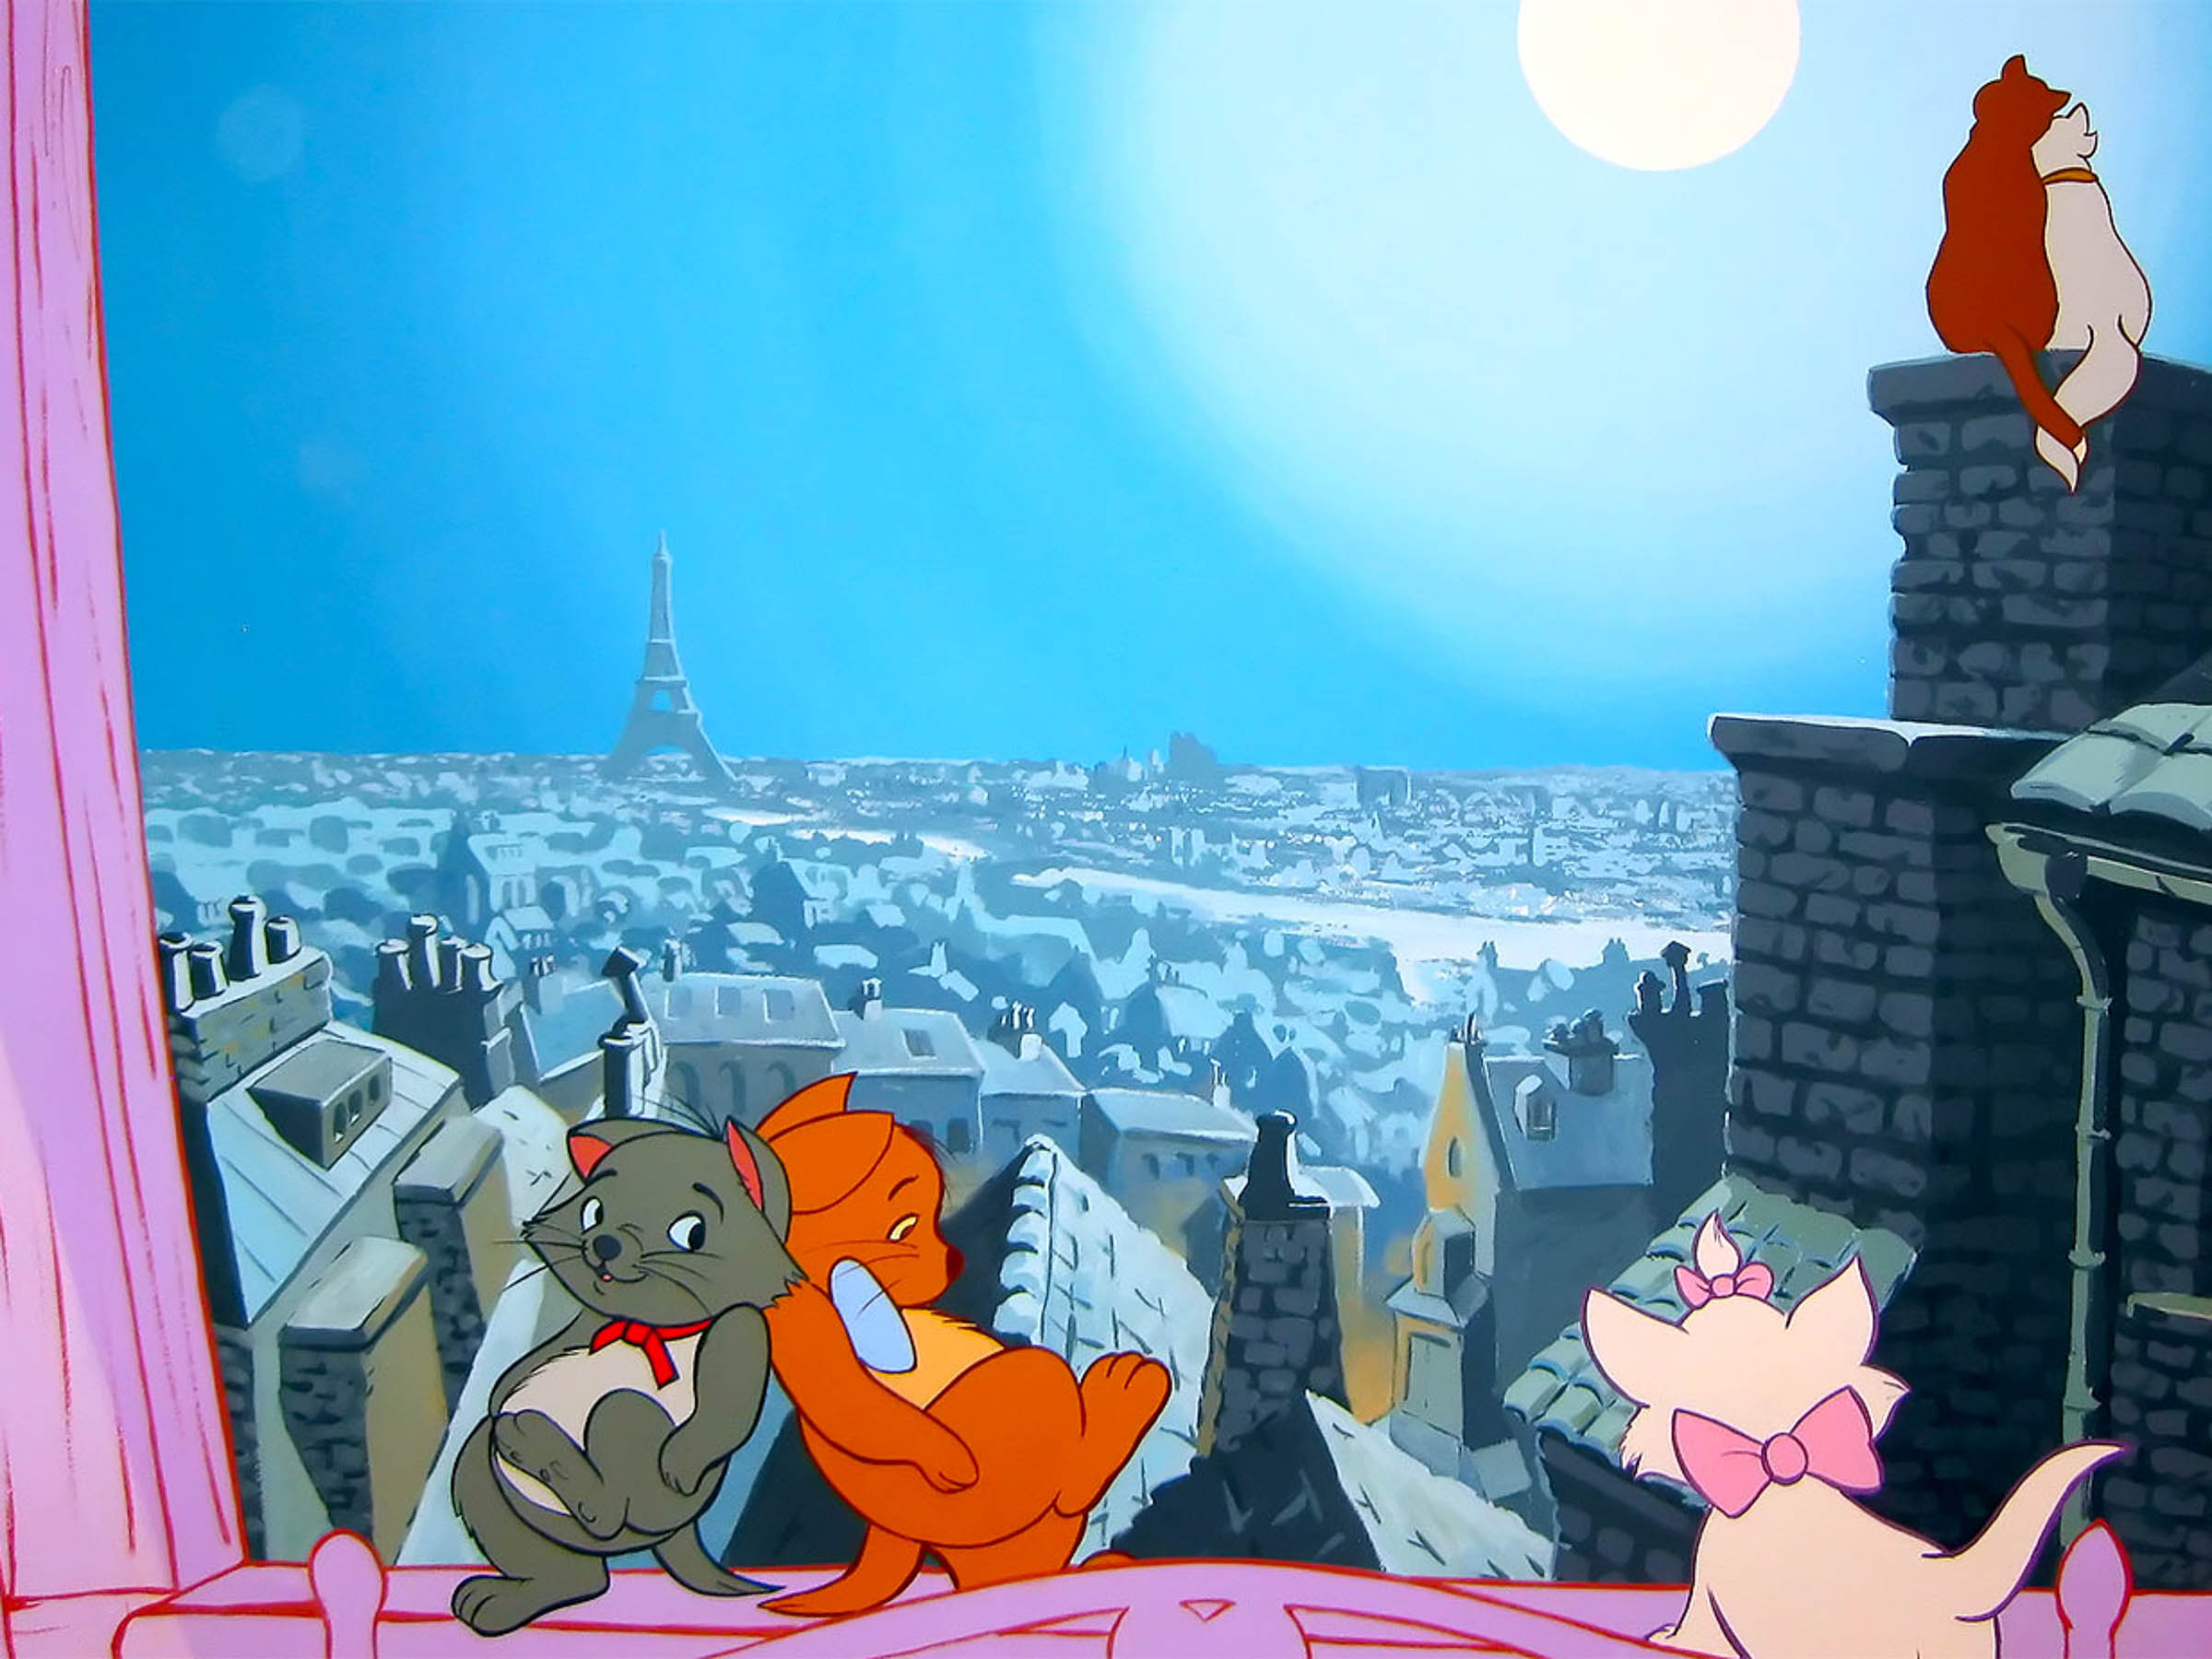 Berlioz and Toulouse dancing on the windowsill, and Marie catches a romantic moment between Duchess and O'Malley